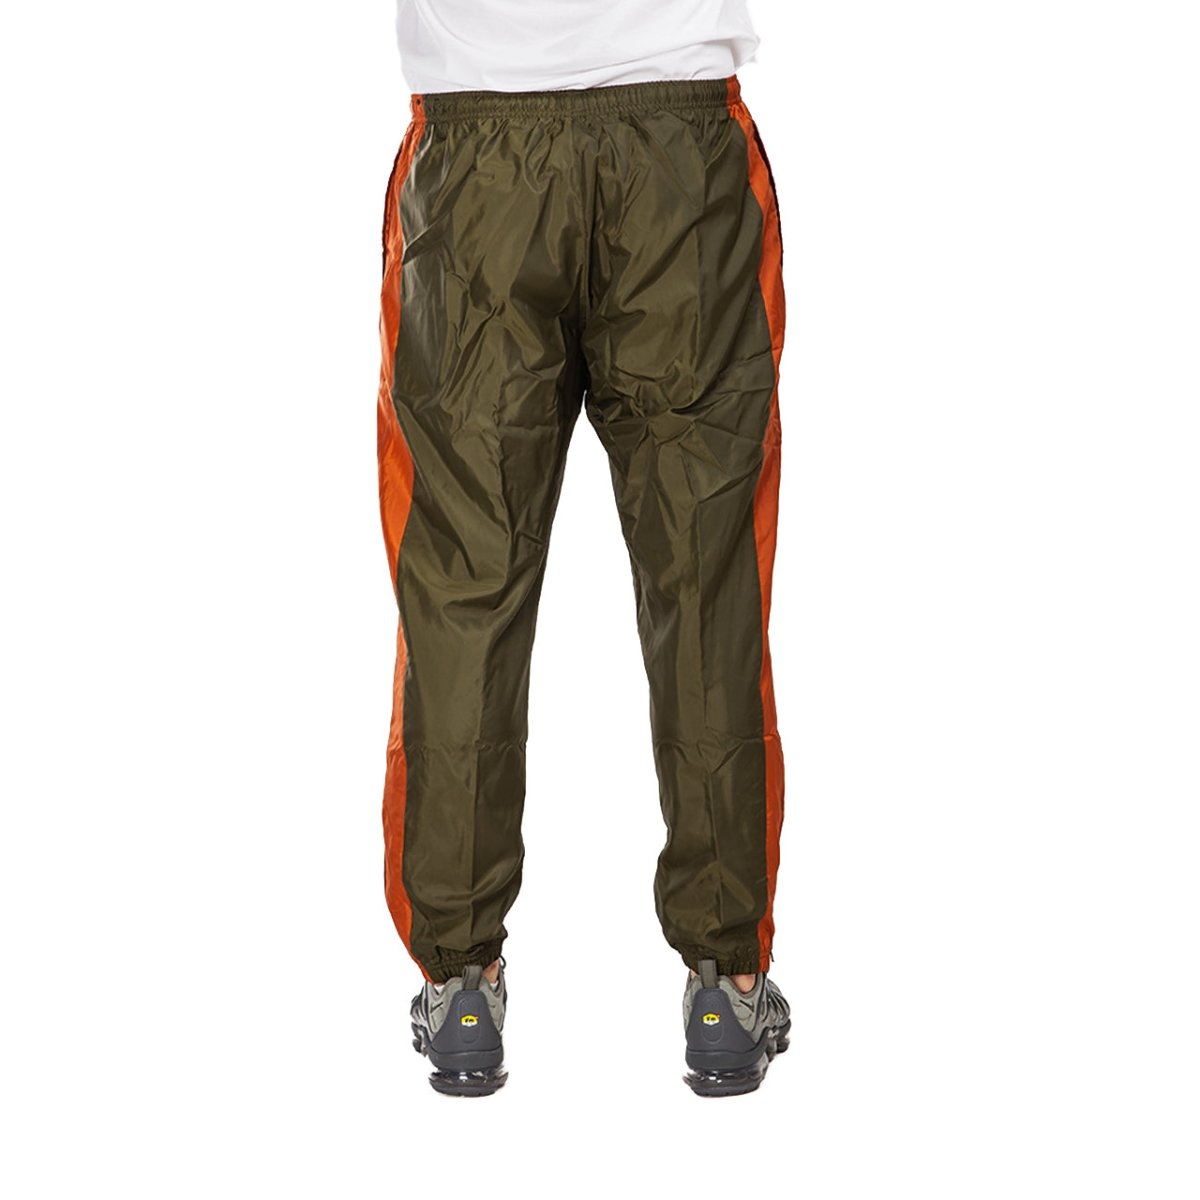 Nike NSW Re-Issue Pant (Olive)  - Allike Store